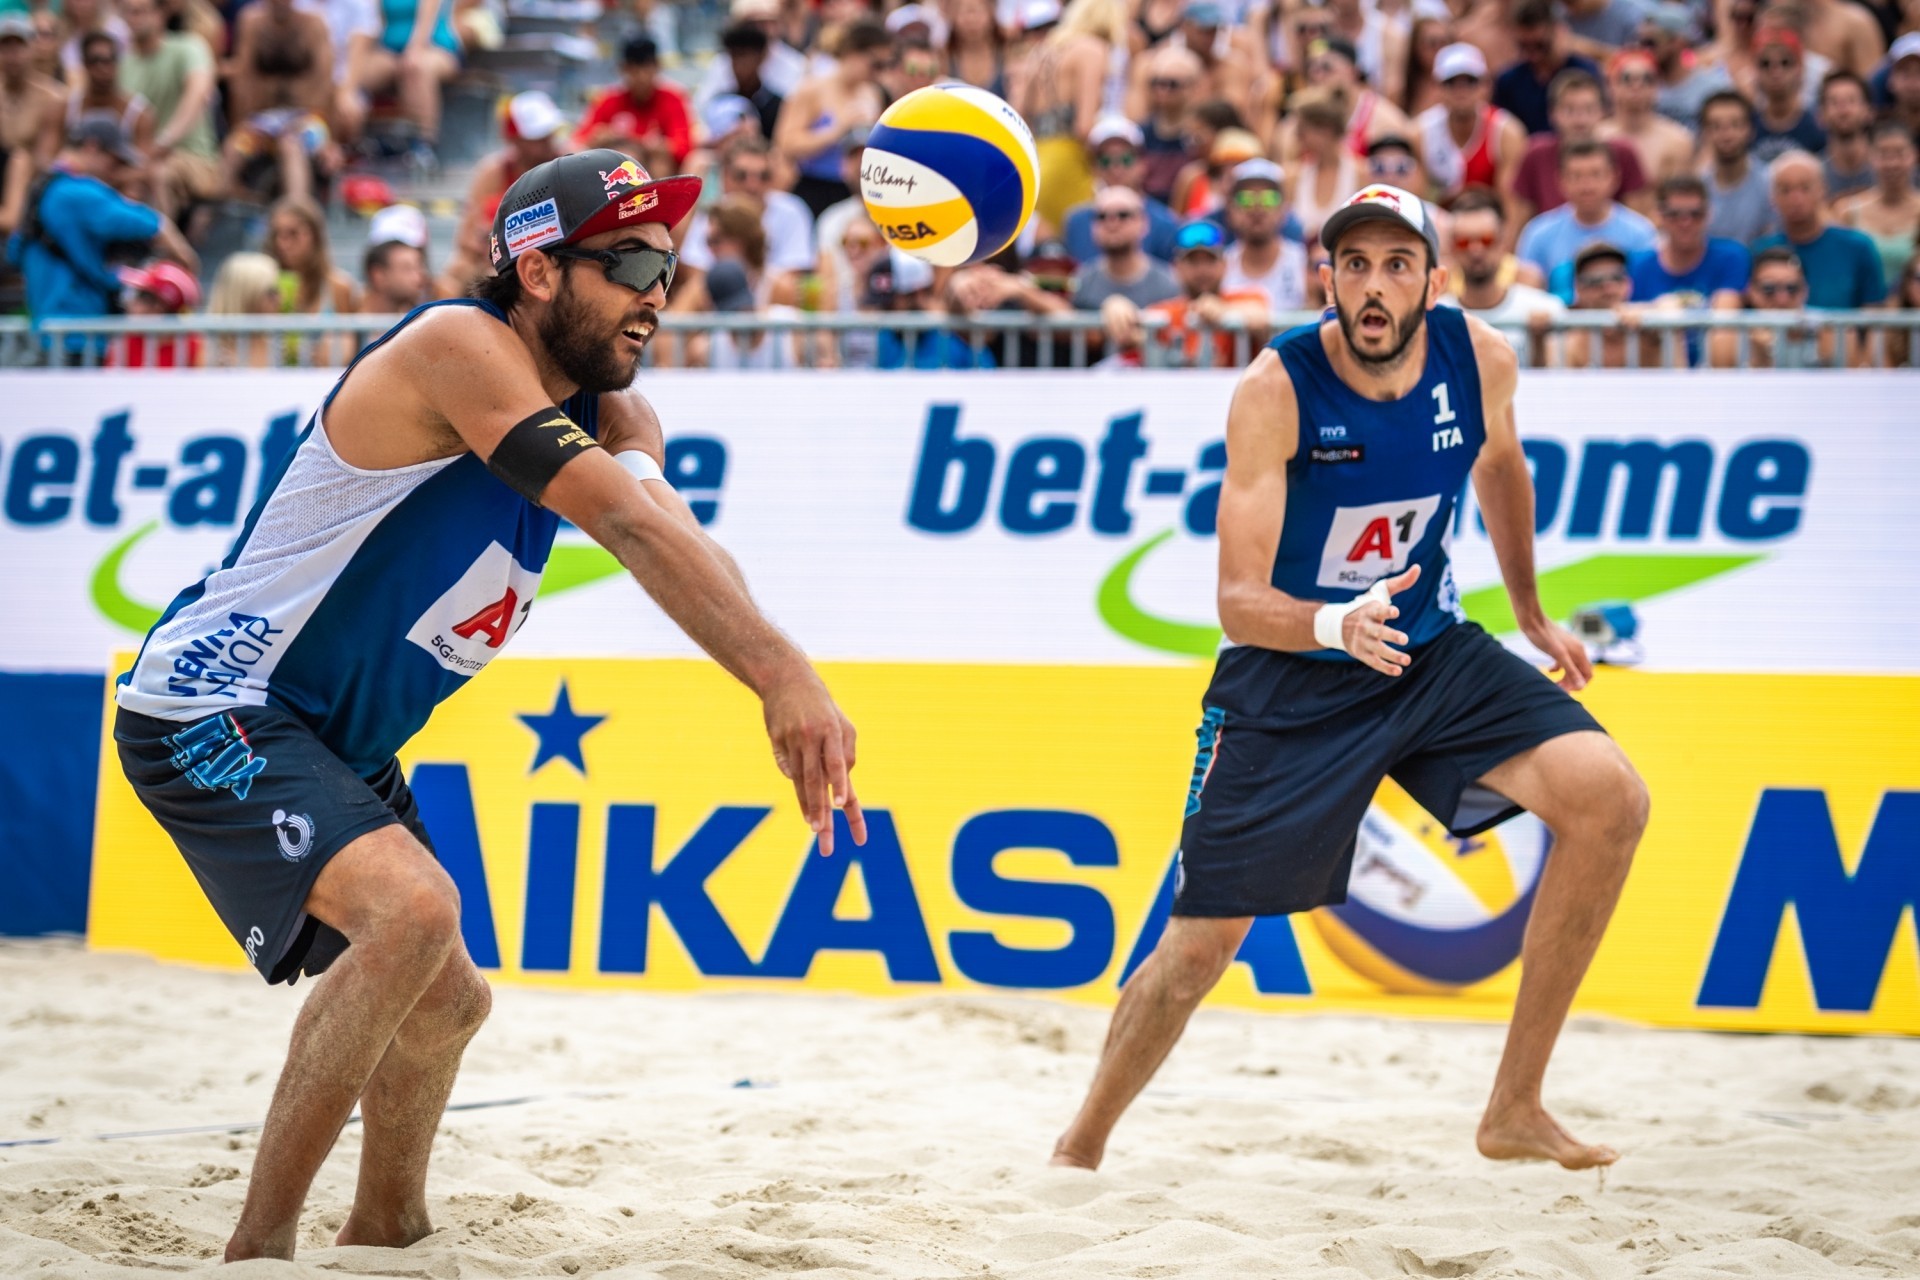 Nicolai and partner Daniele Lupo in action during the 2019 Vienna Major